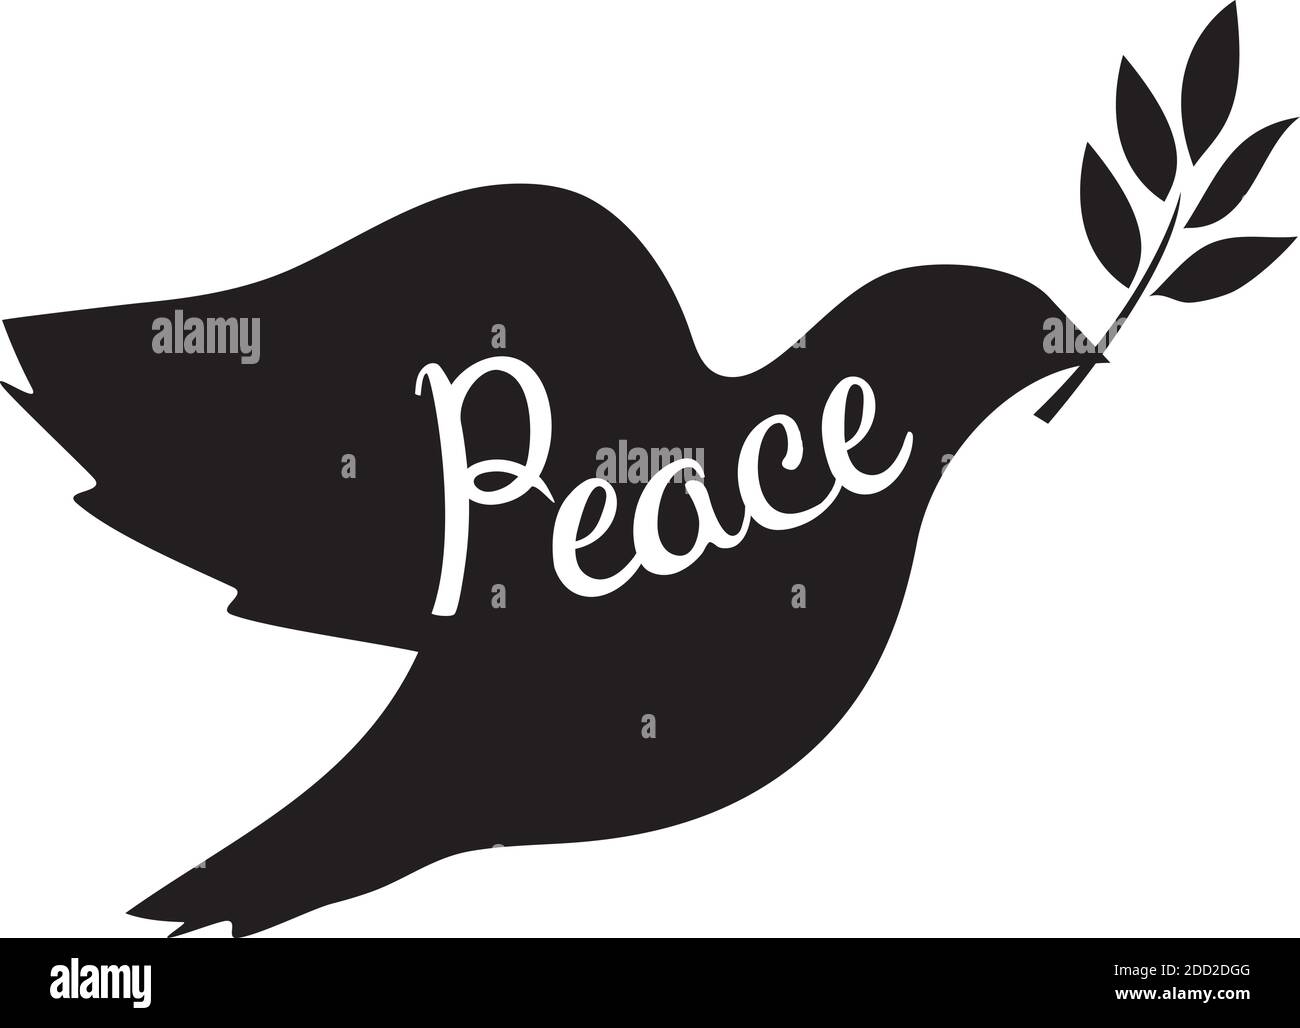 vector illustration of a peace dove with olive branch. dove, bird silhouette. Stock Vector